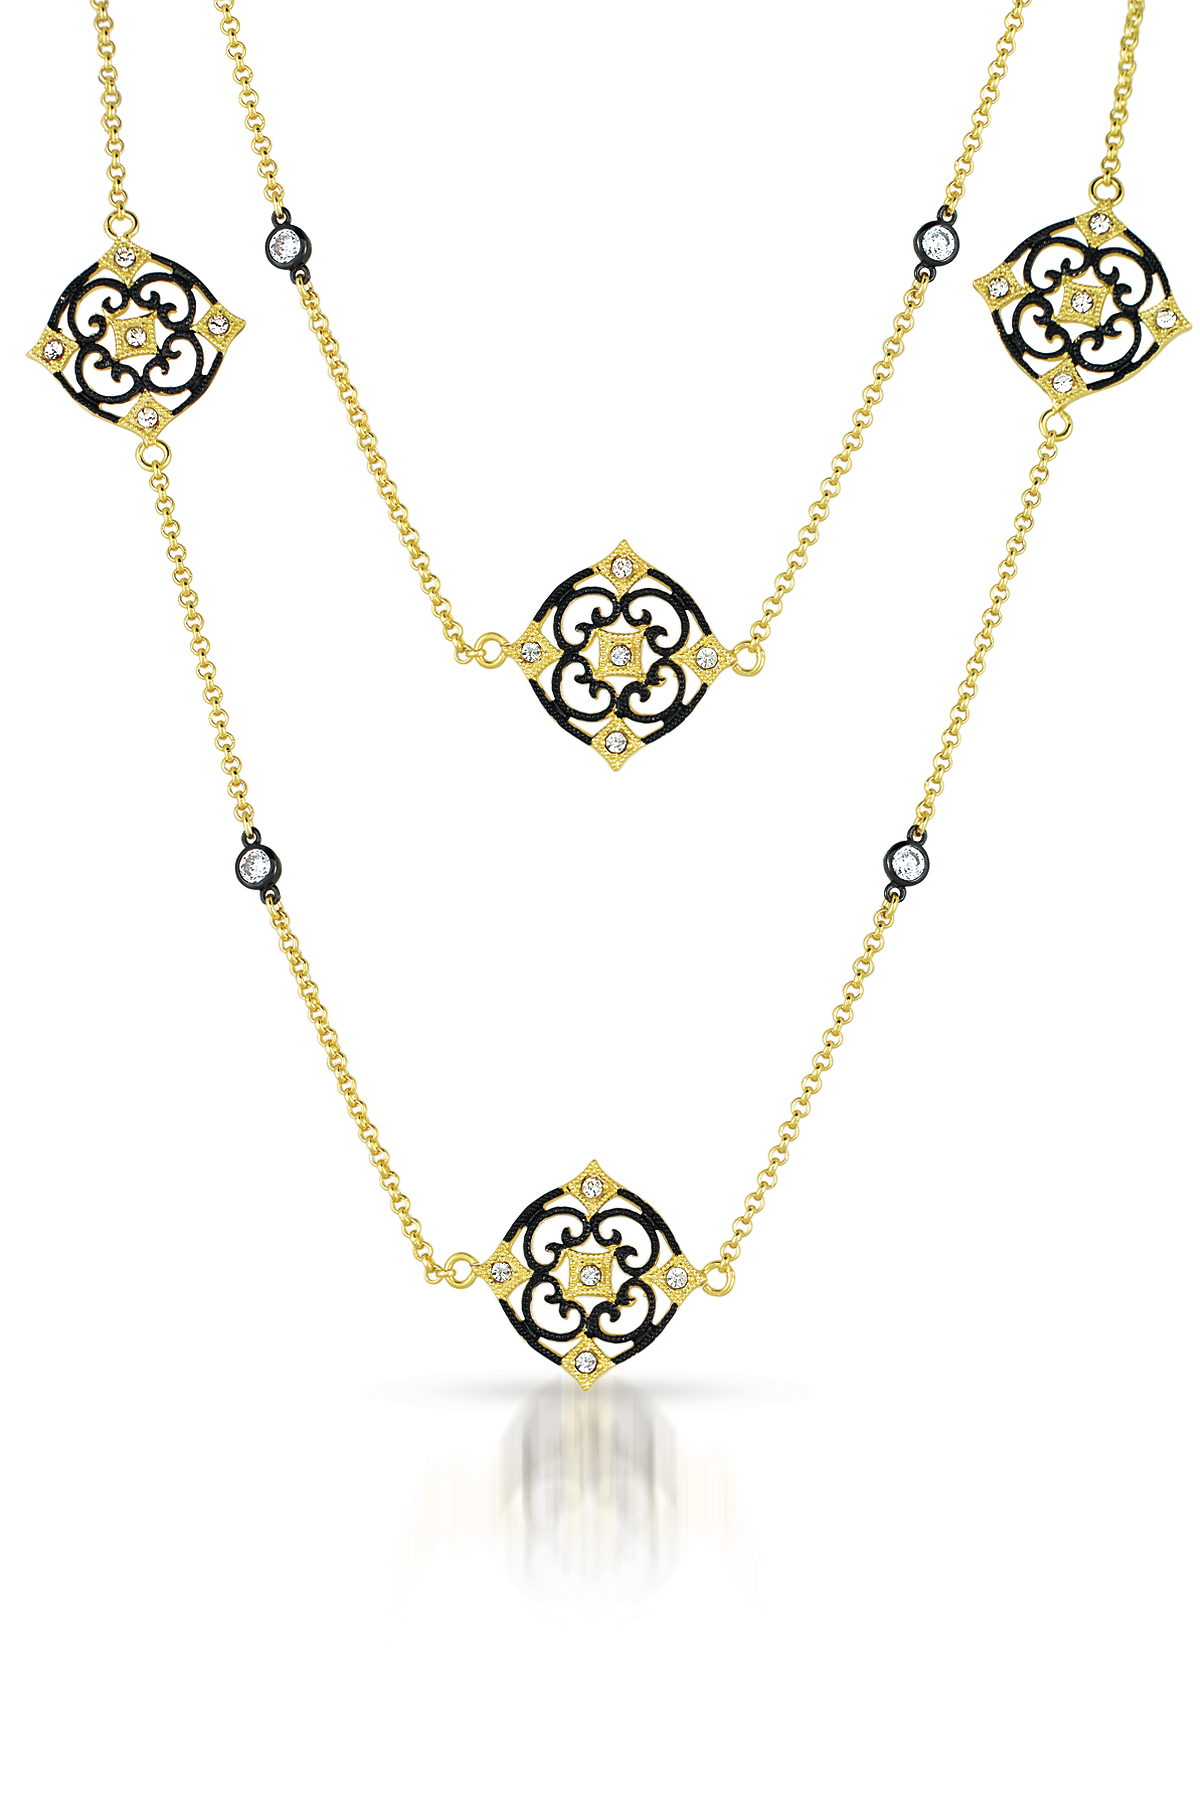 Cubic Zirconia (.925) Sterling Silver Black And Gold Lace Deco Necklace